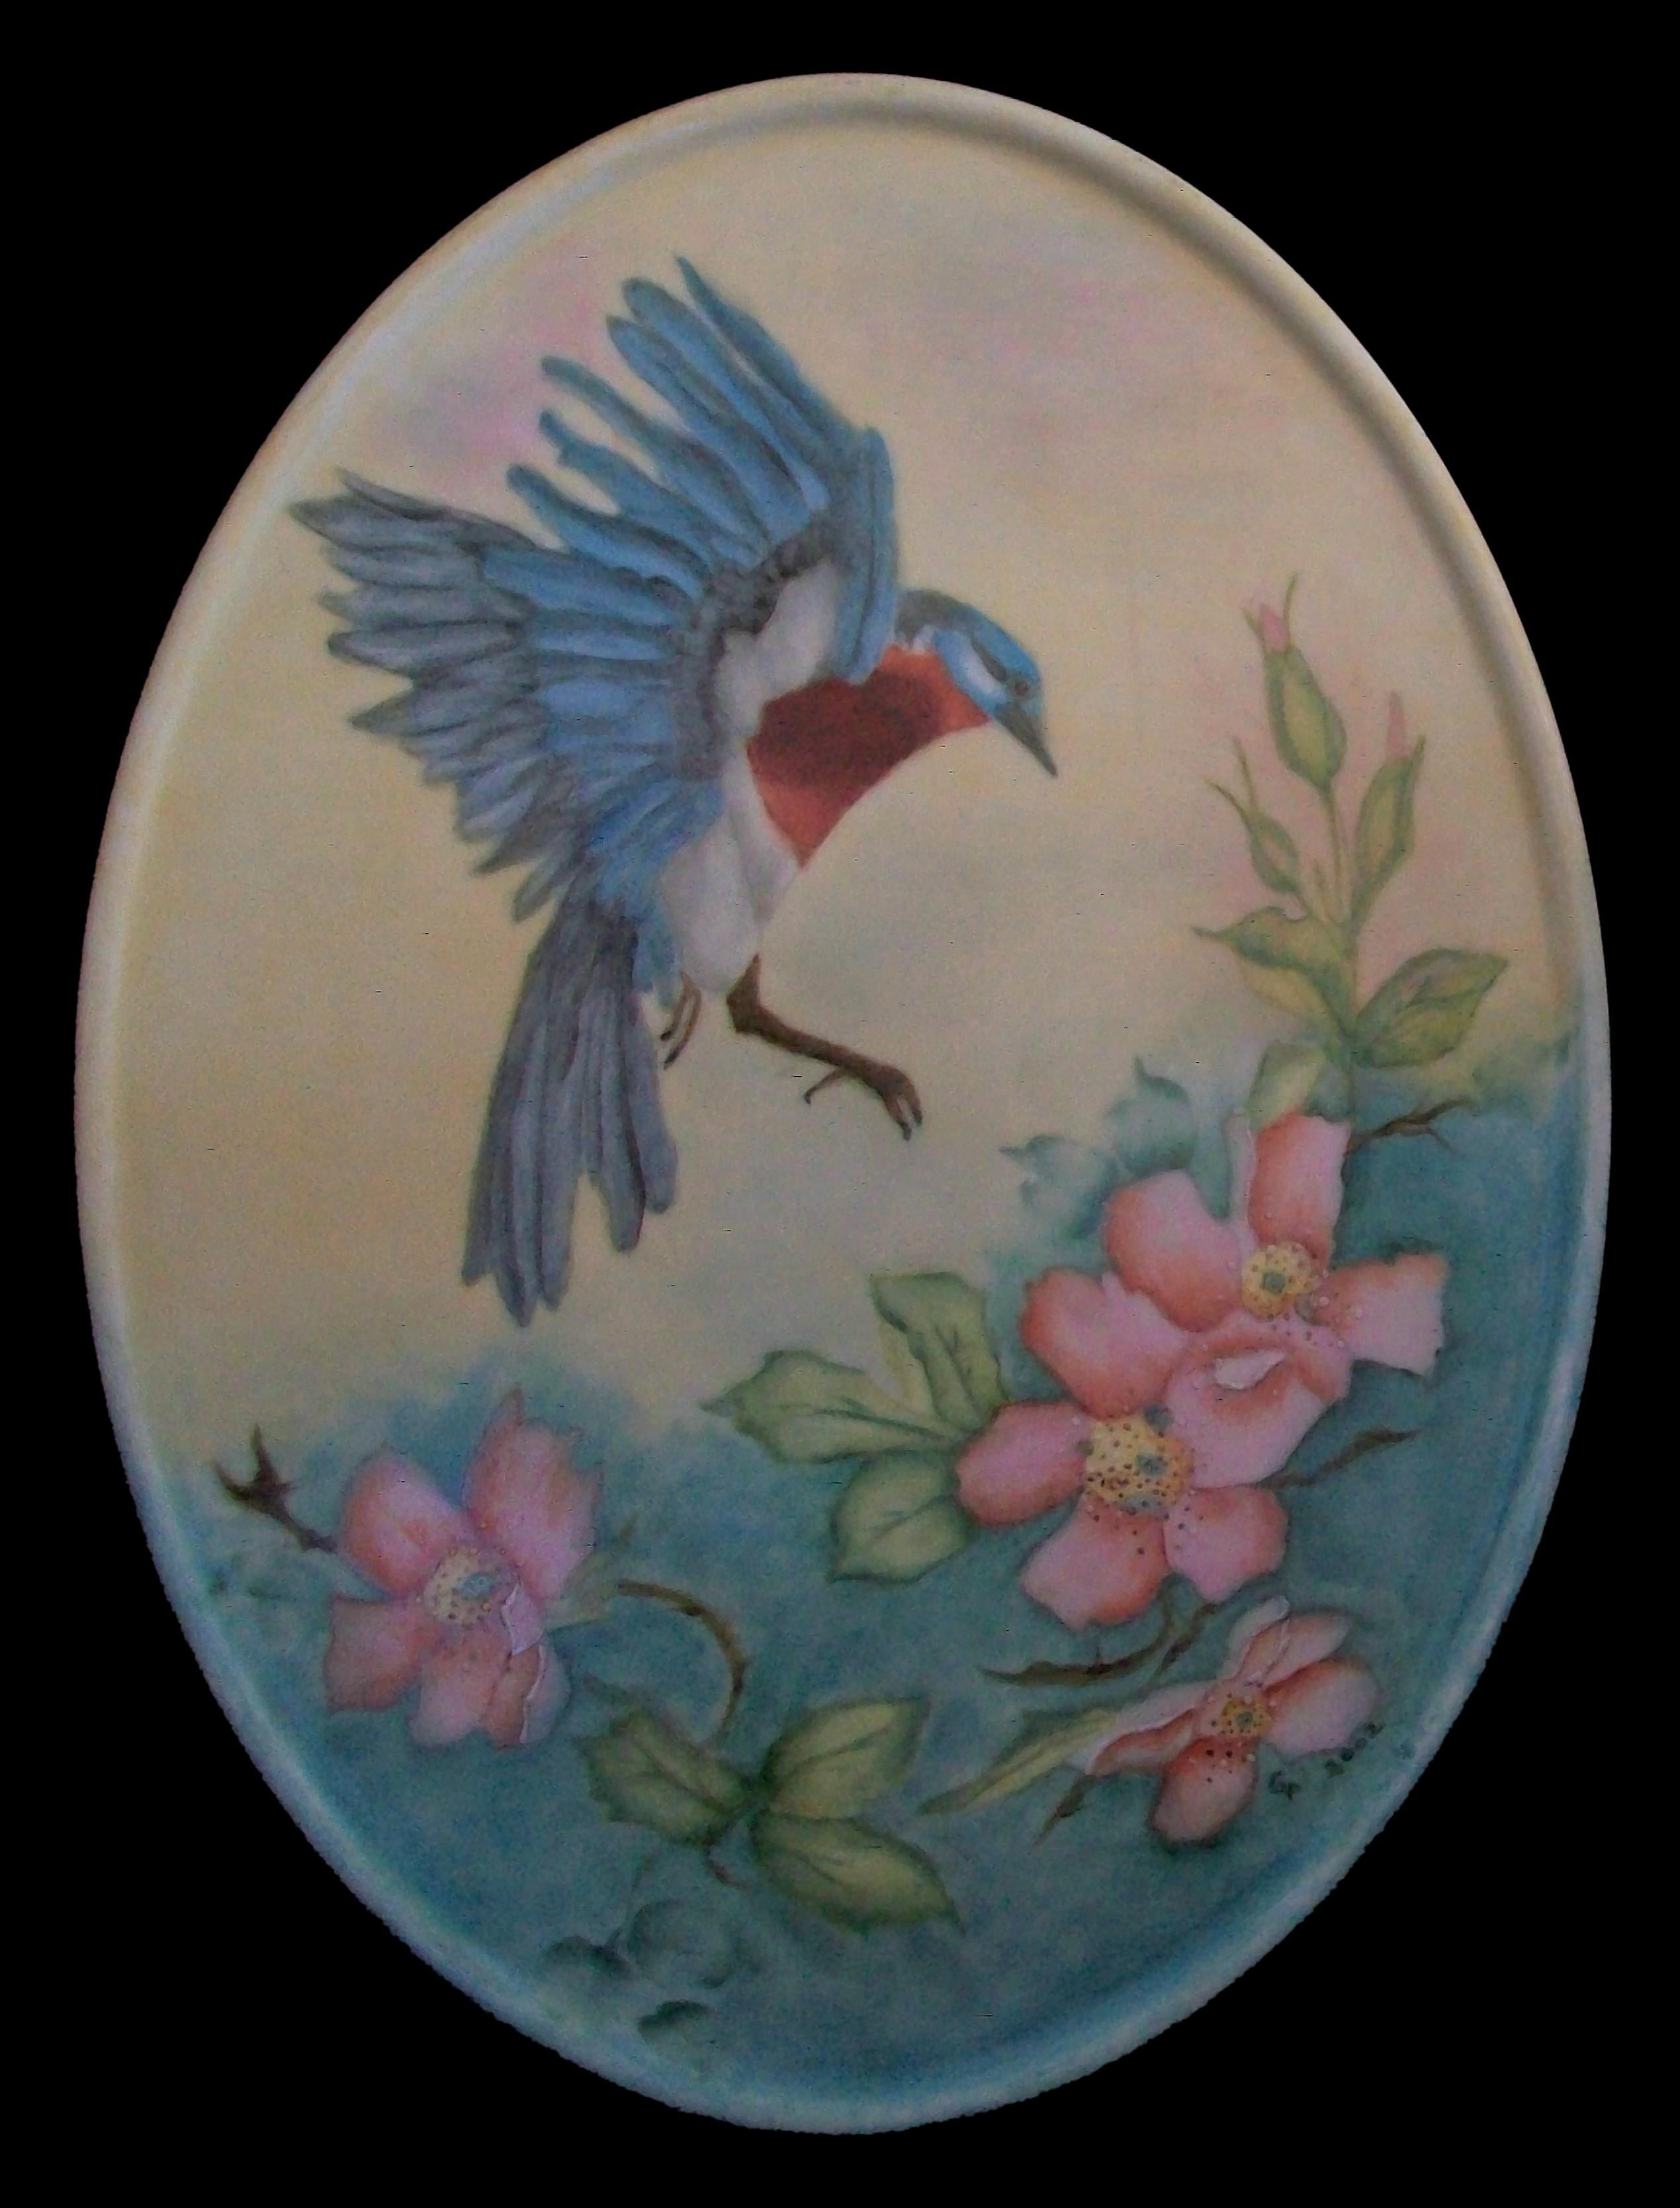 DRESDEN - Blue bird and floral porcelain plaque - beautiful and fine hand painting with a subtle shaded background - signed GP and dated lower right - impressed mark on the back side (as photographed - crown above 'D') - Germany - circa 2002.